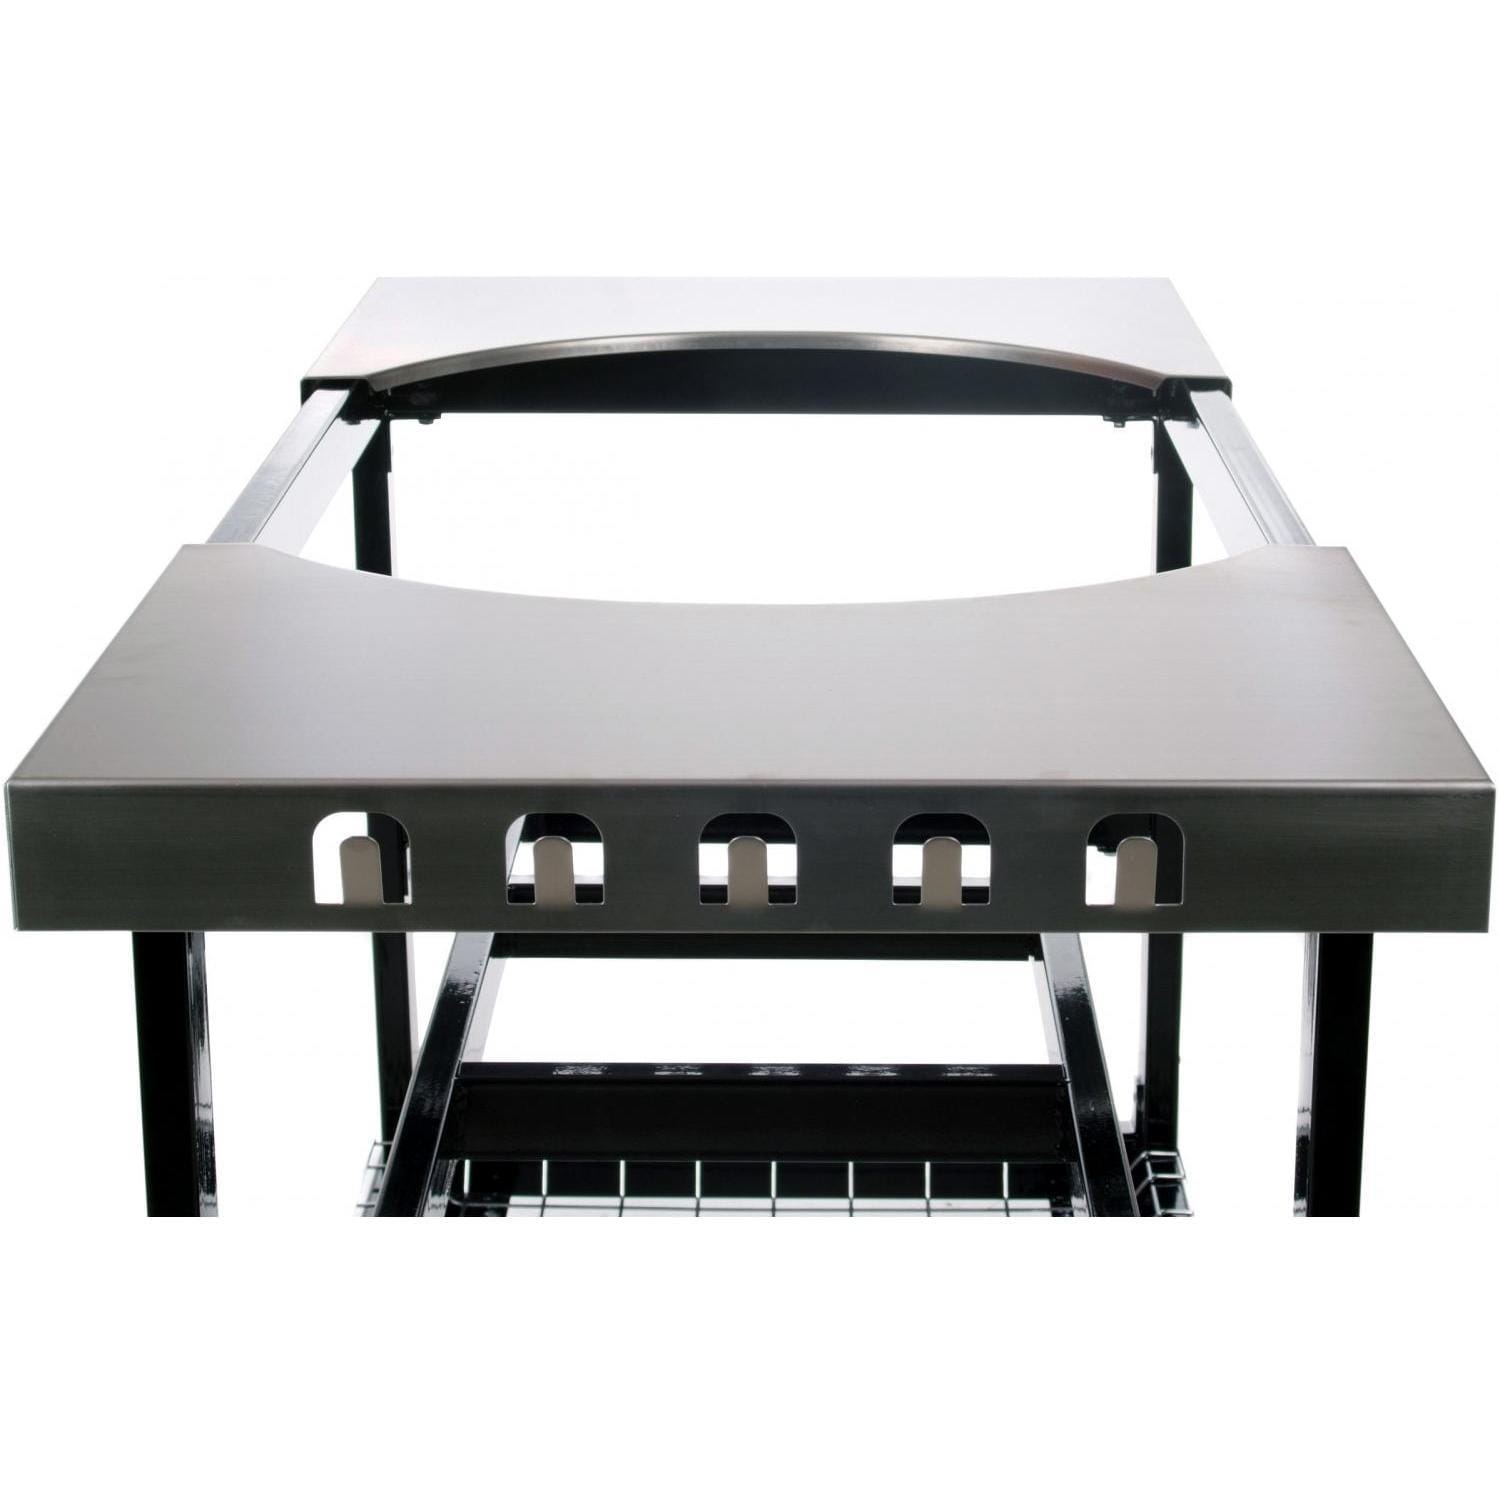 Primo Grills Primo Grills Accessories Primo Grills Cart Base with Basket and SS Side Shelves for Oval LG 300 & XL 400